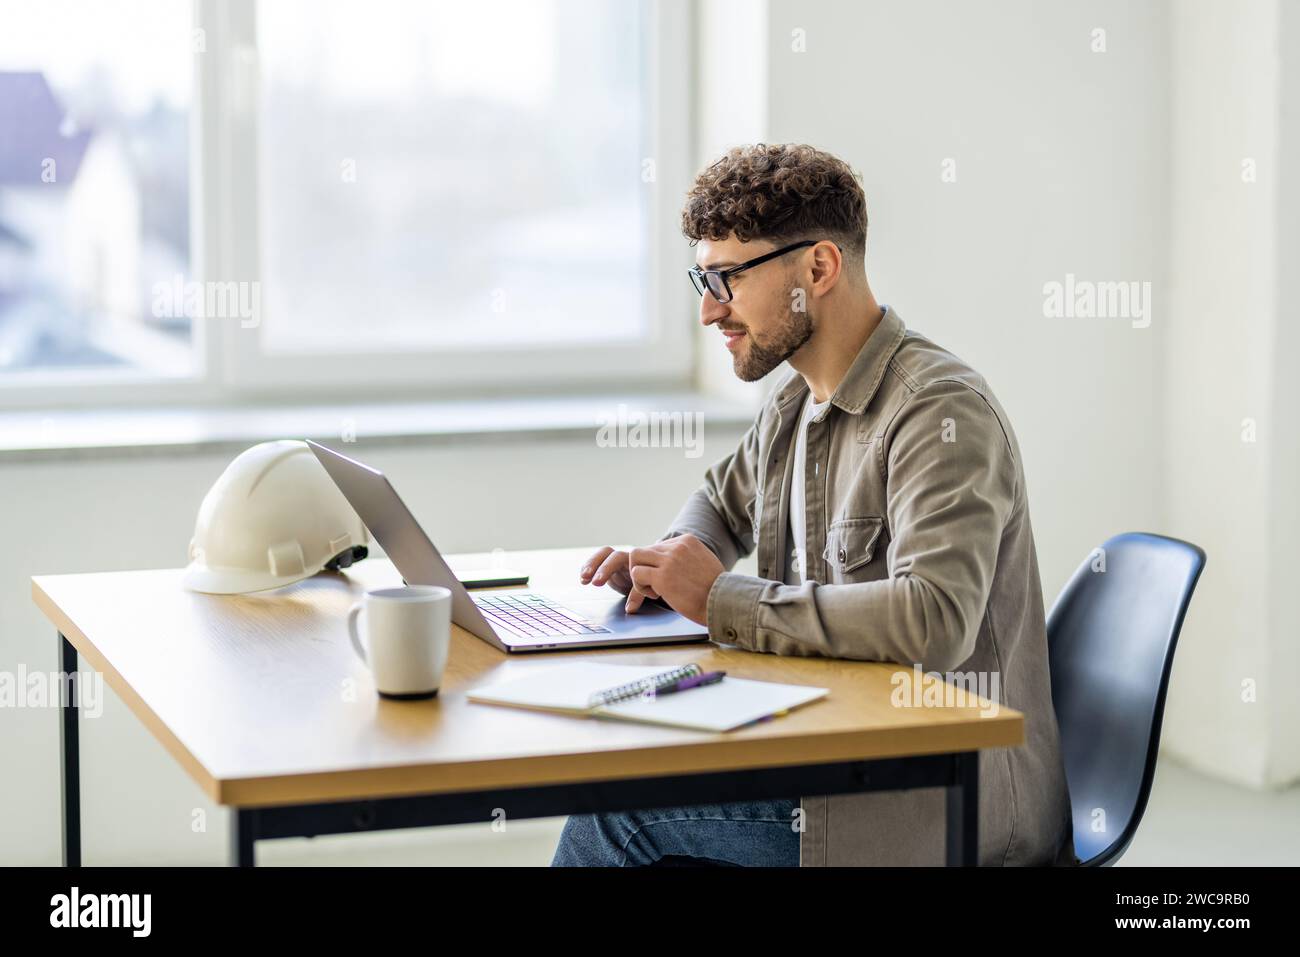 Young business man working at home with laptop and papers on desk Stock Photo